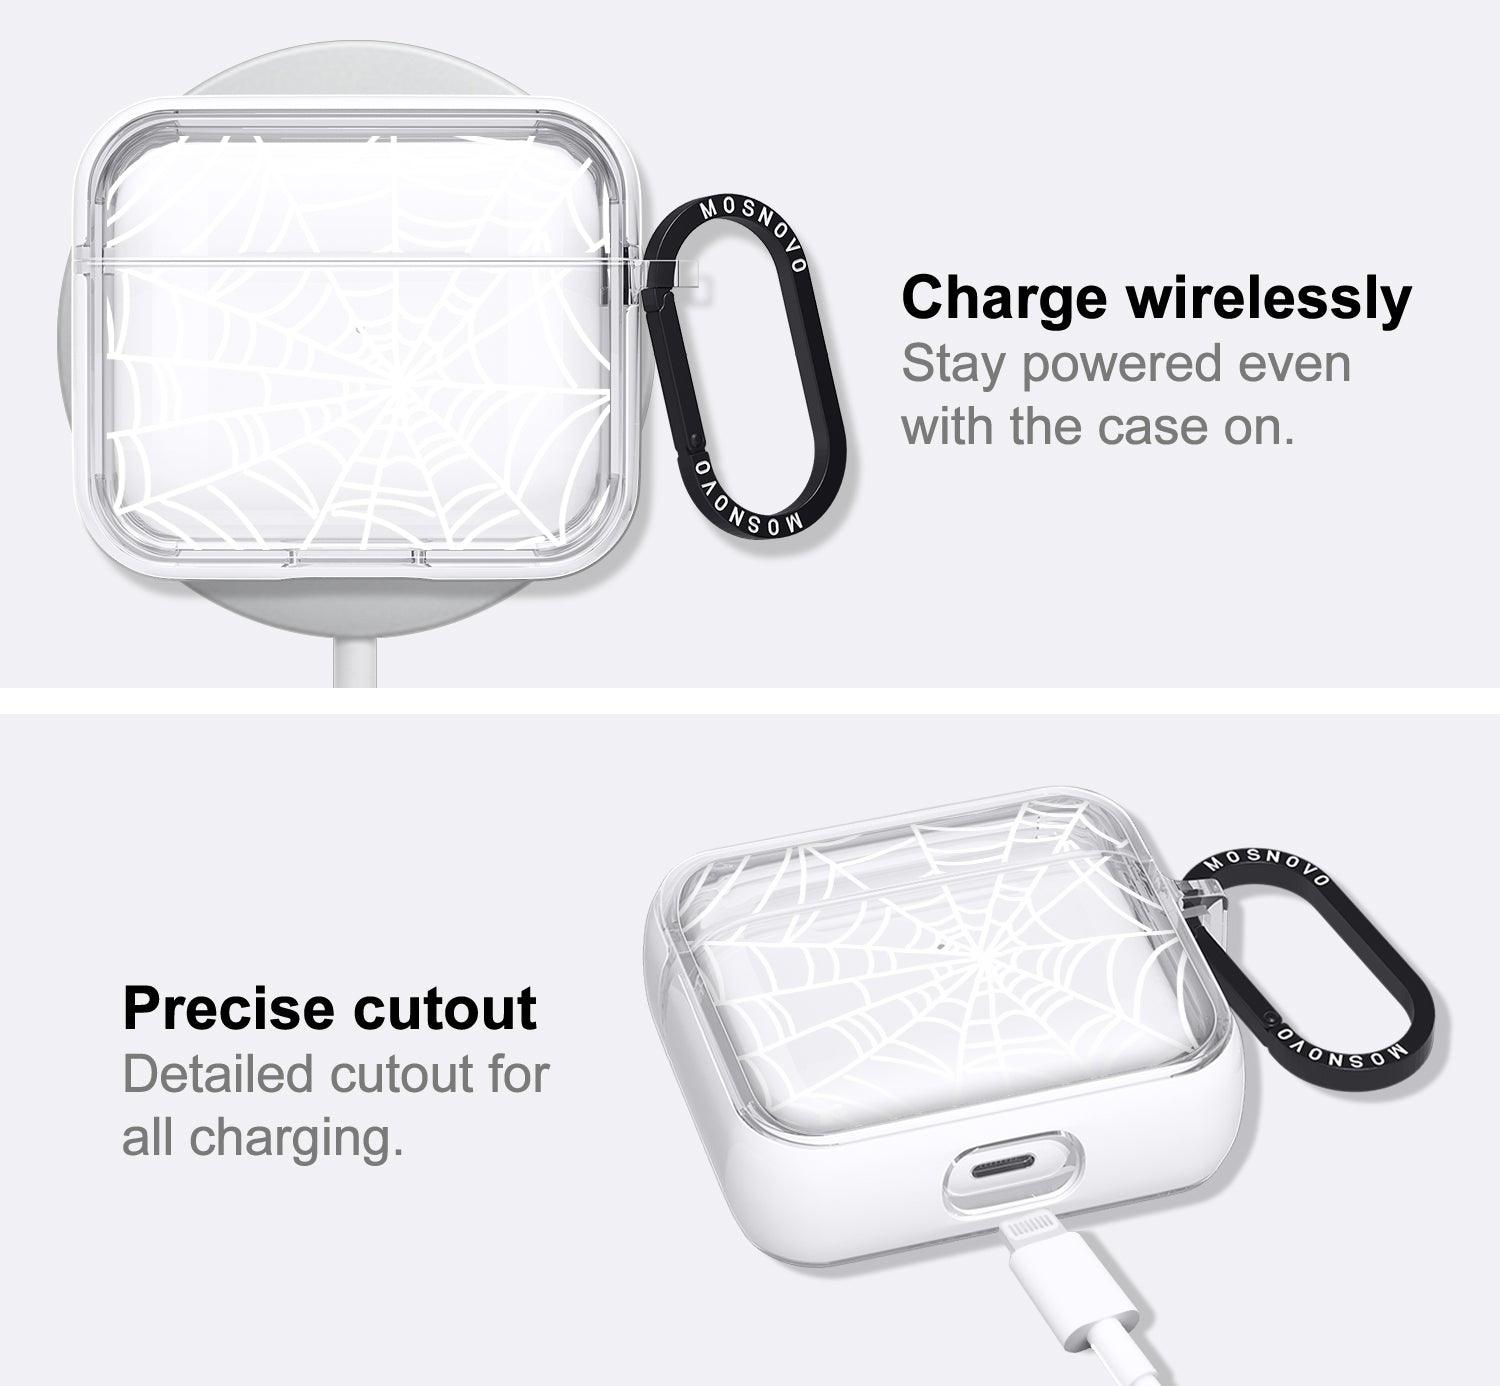 Spider Web AirPods 3 Case (3rd Generation) - MOSNOVO